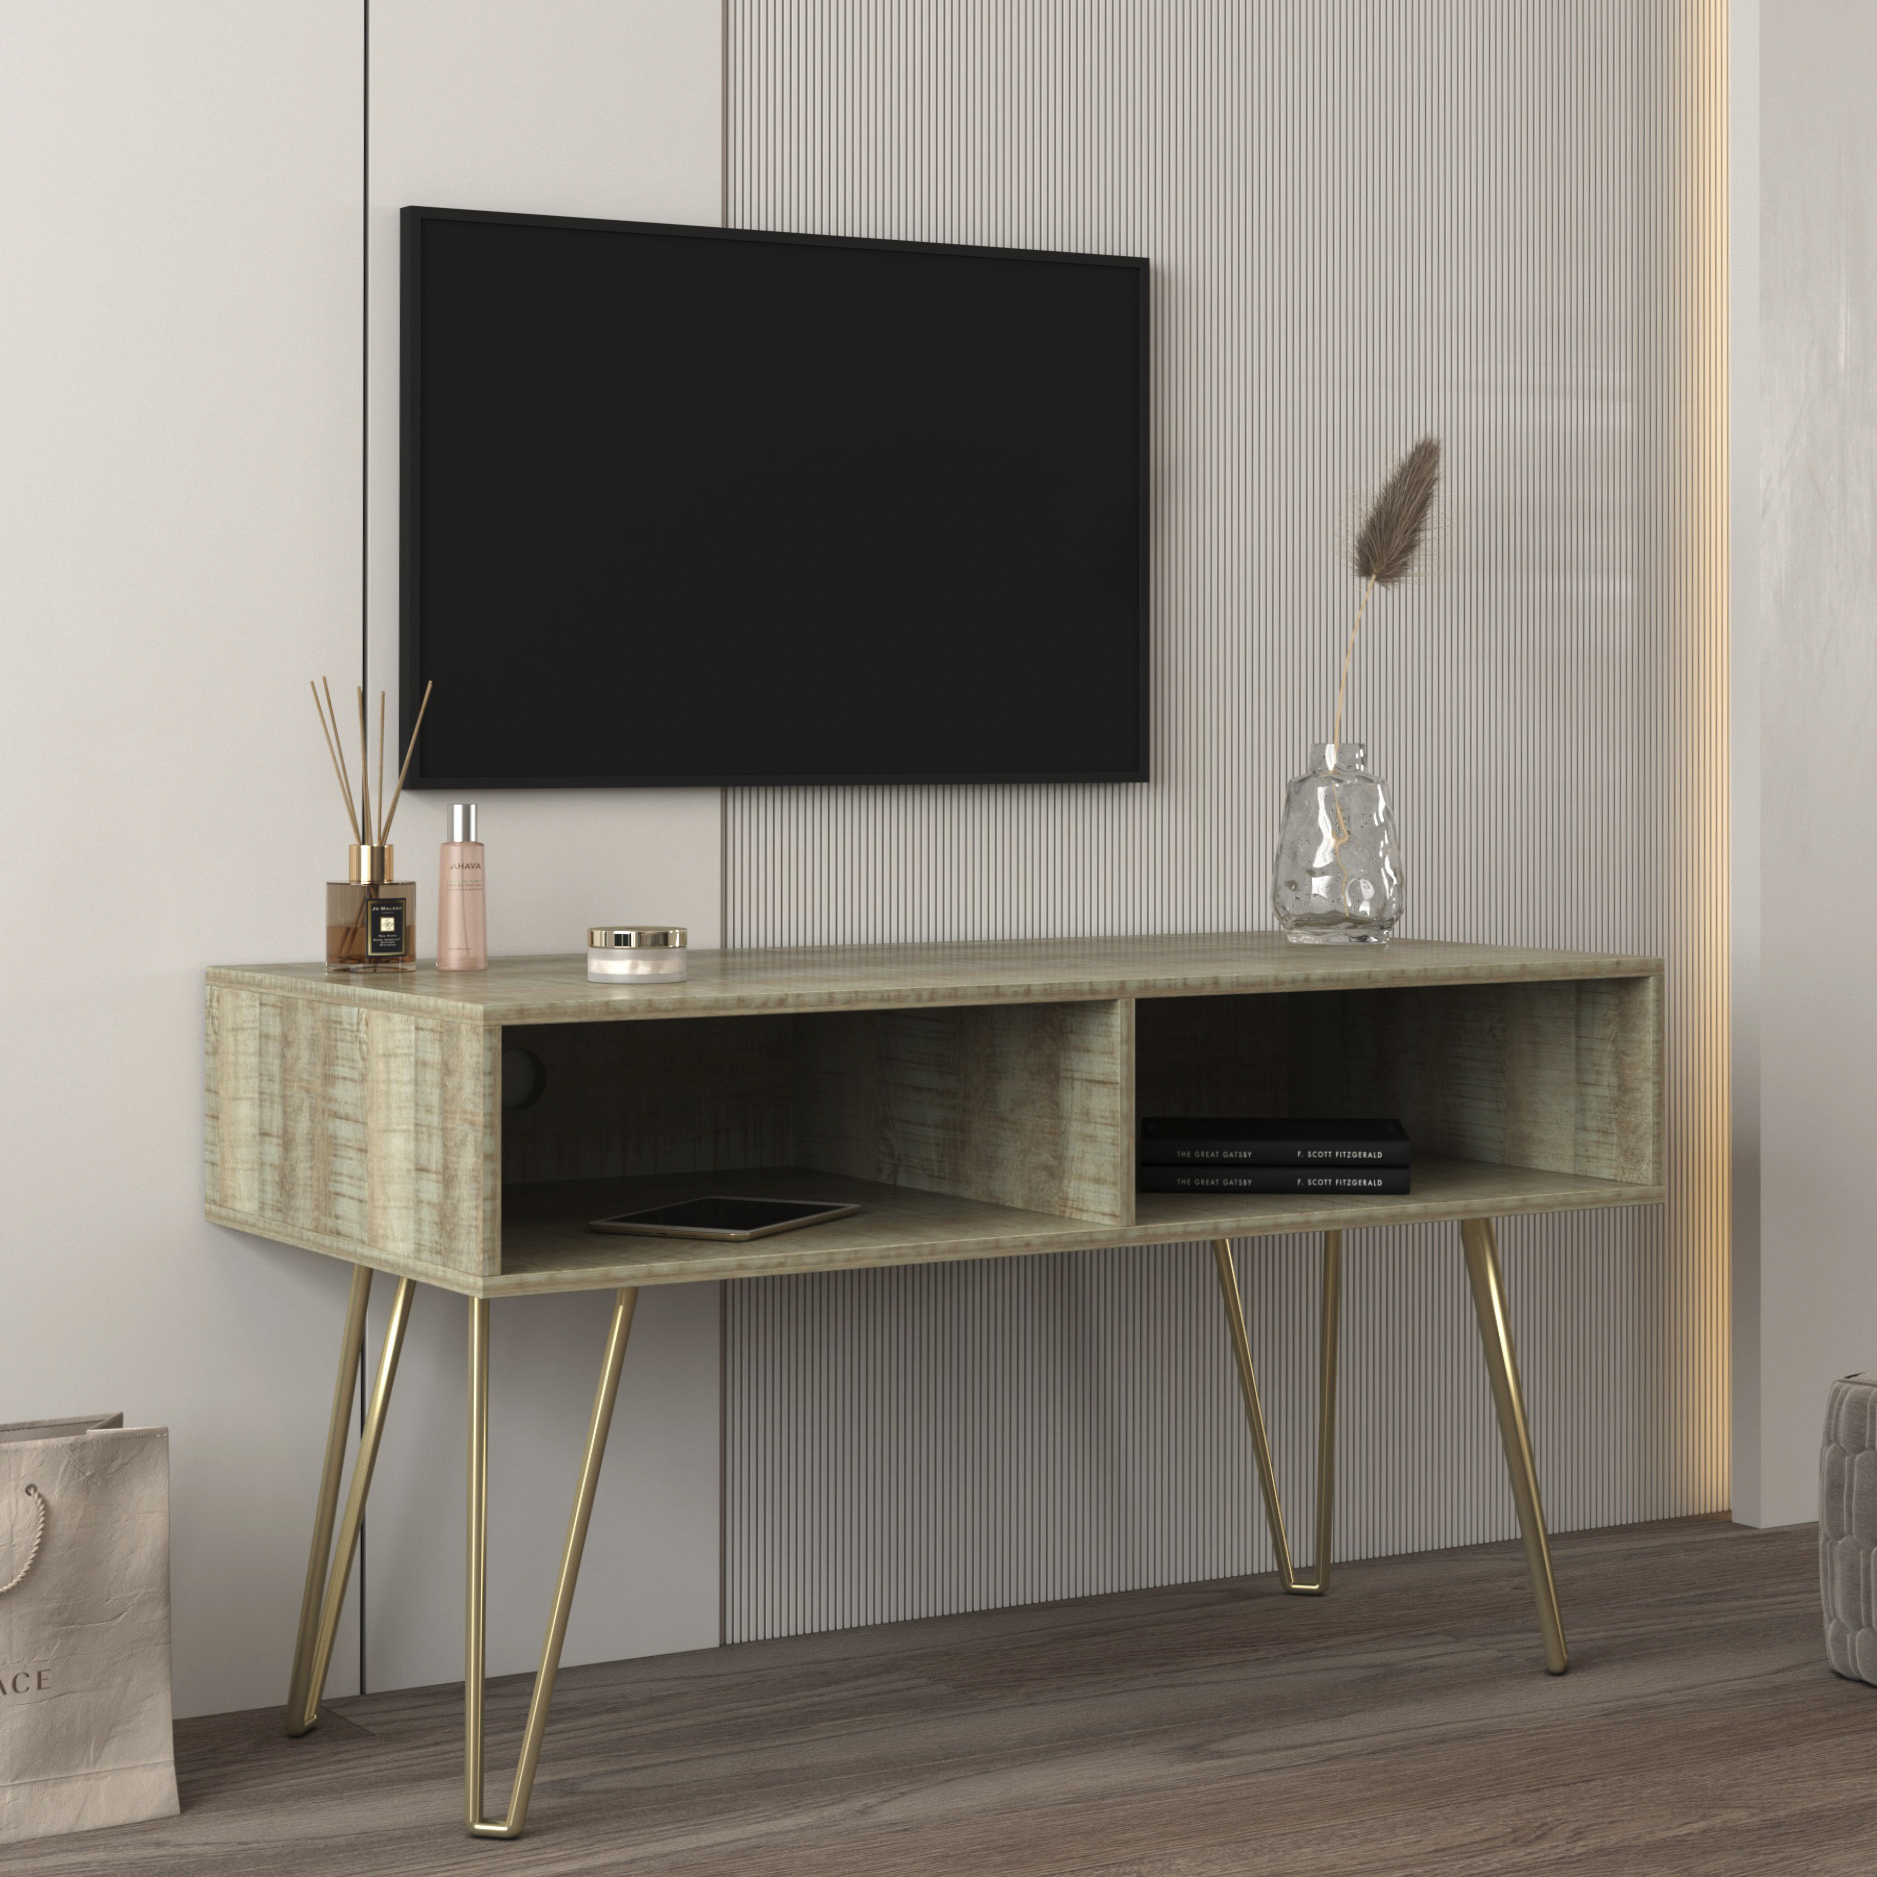 Modern Design TV stand stable Metal Legs  with 2 open shelves to put TV, DVD, router, books, and small ornaments,Grey-Boyel Living